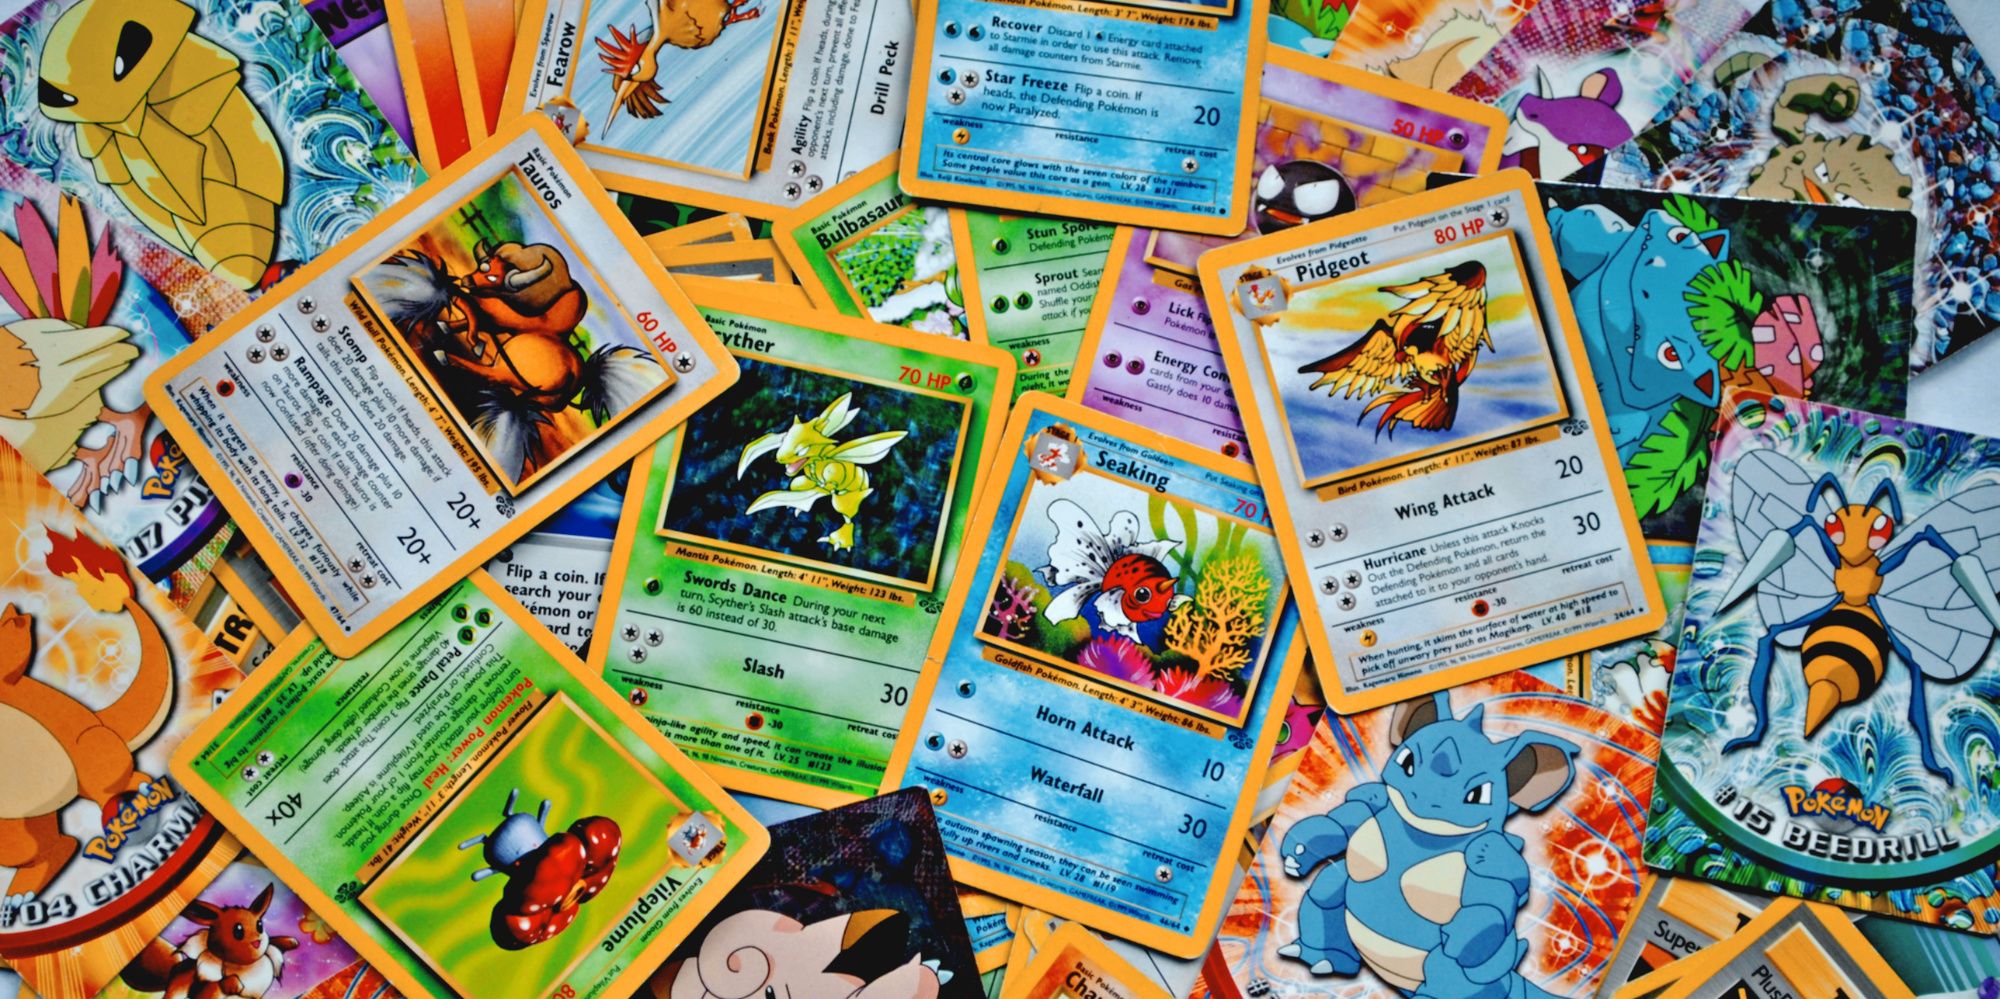 A Complete Set of Pokemon First Edition Cards Could Sell for Over 100K